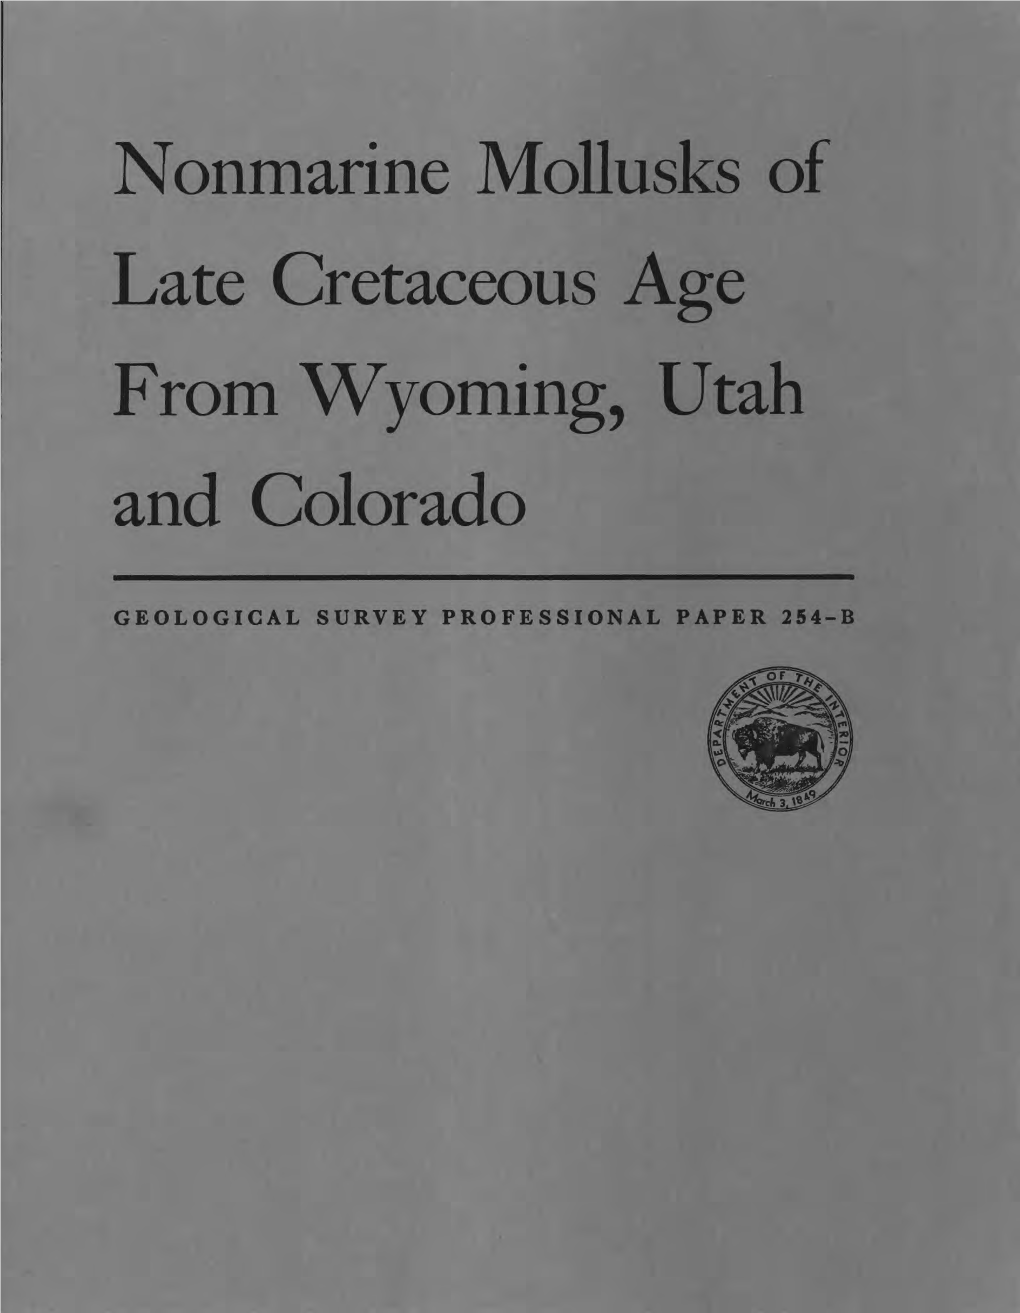 Nonmarine Mollusks of Late Cretaceous Age from Wyoming, Utah and Colorado